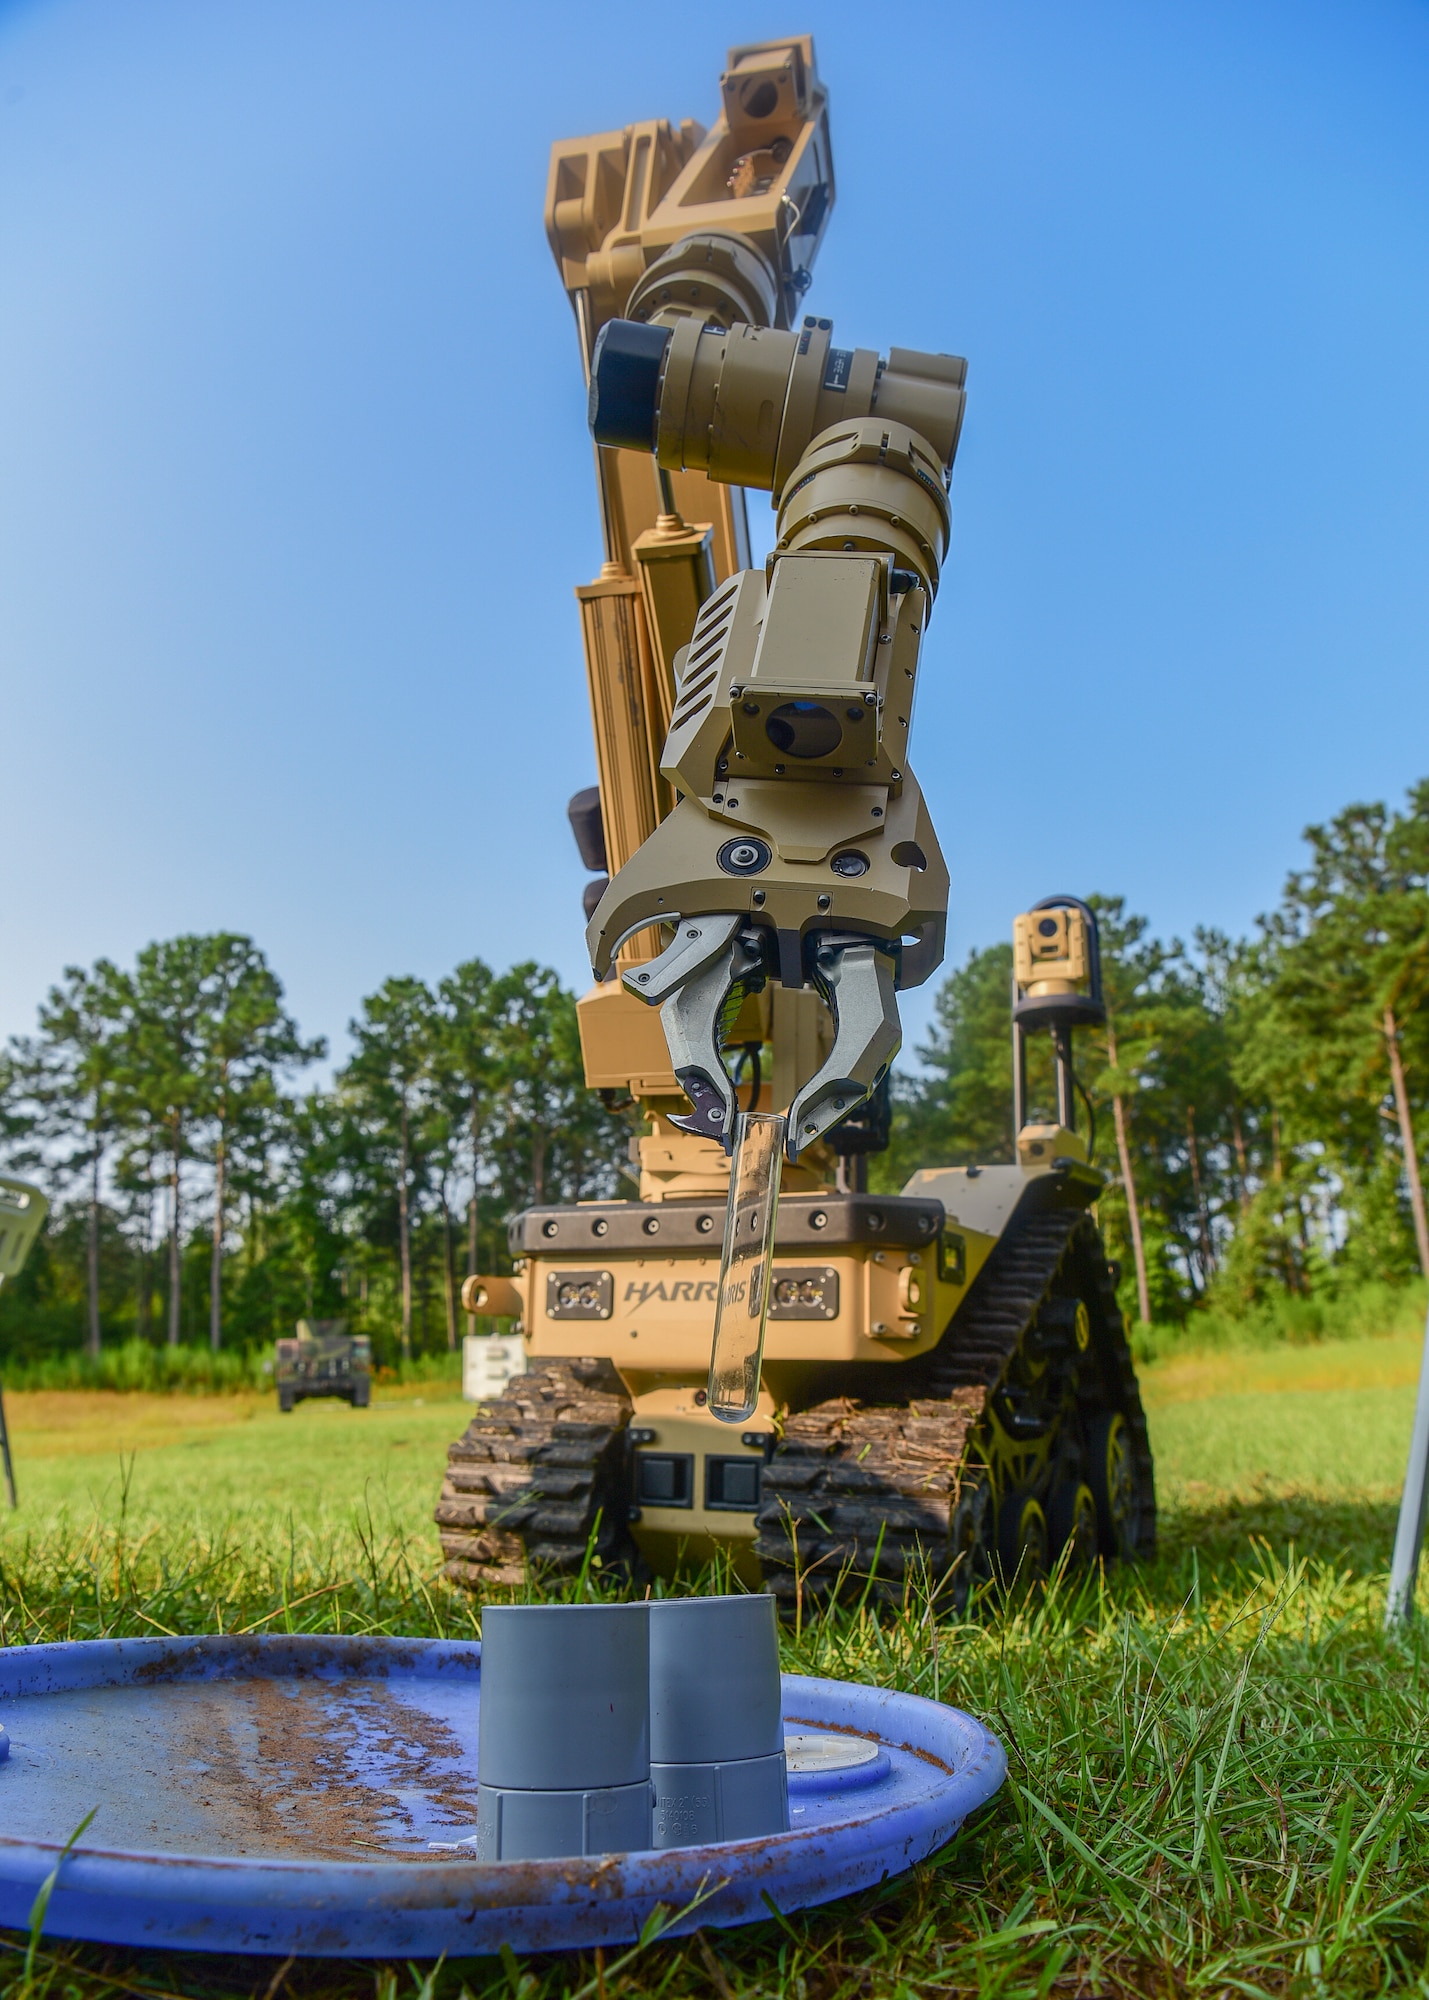 The Harris T7, a remotely operated ordnance disposal robot, places a glass vile into a holder during a demonstration at the 2018 Eastern National Robotics Rodeo Aug. 14, 2018, at Joint Base Charleston, S.C.